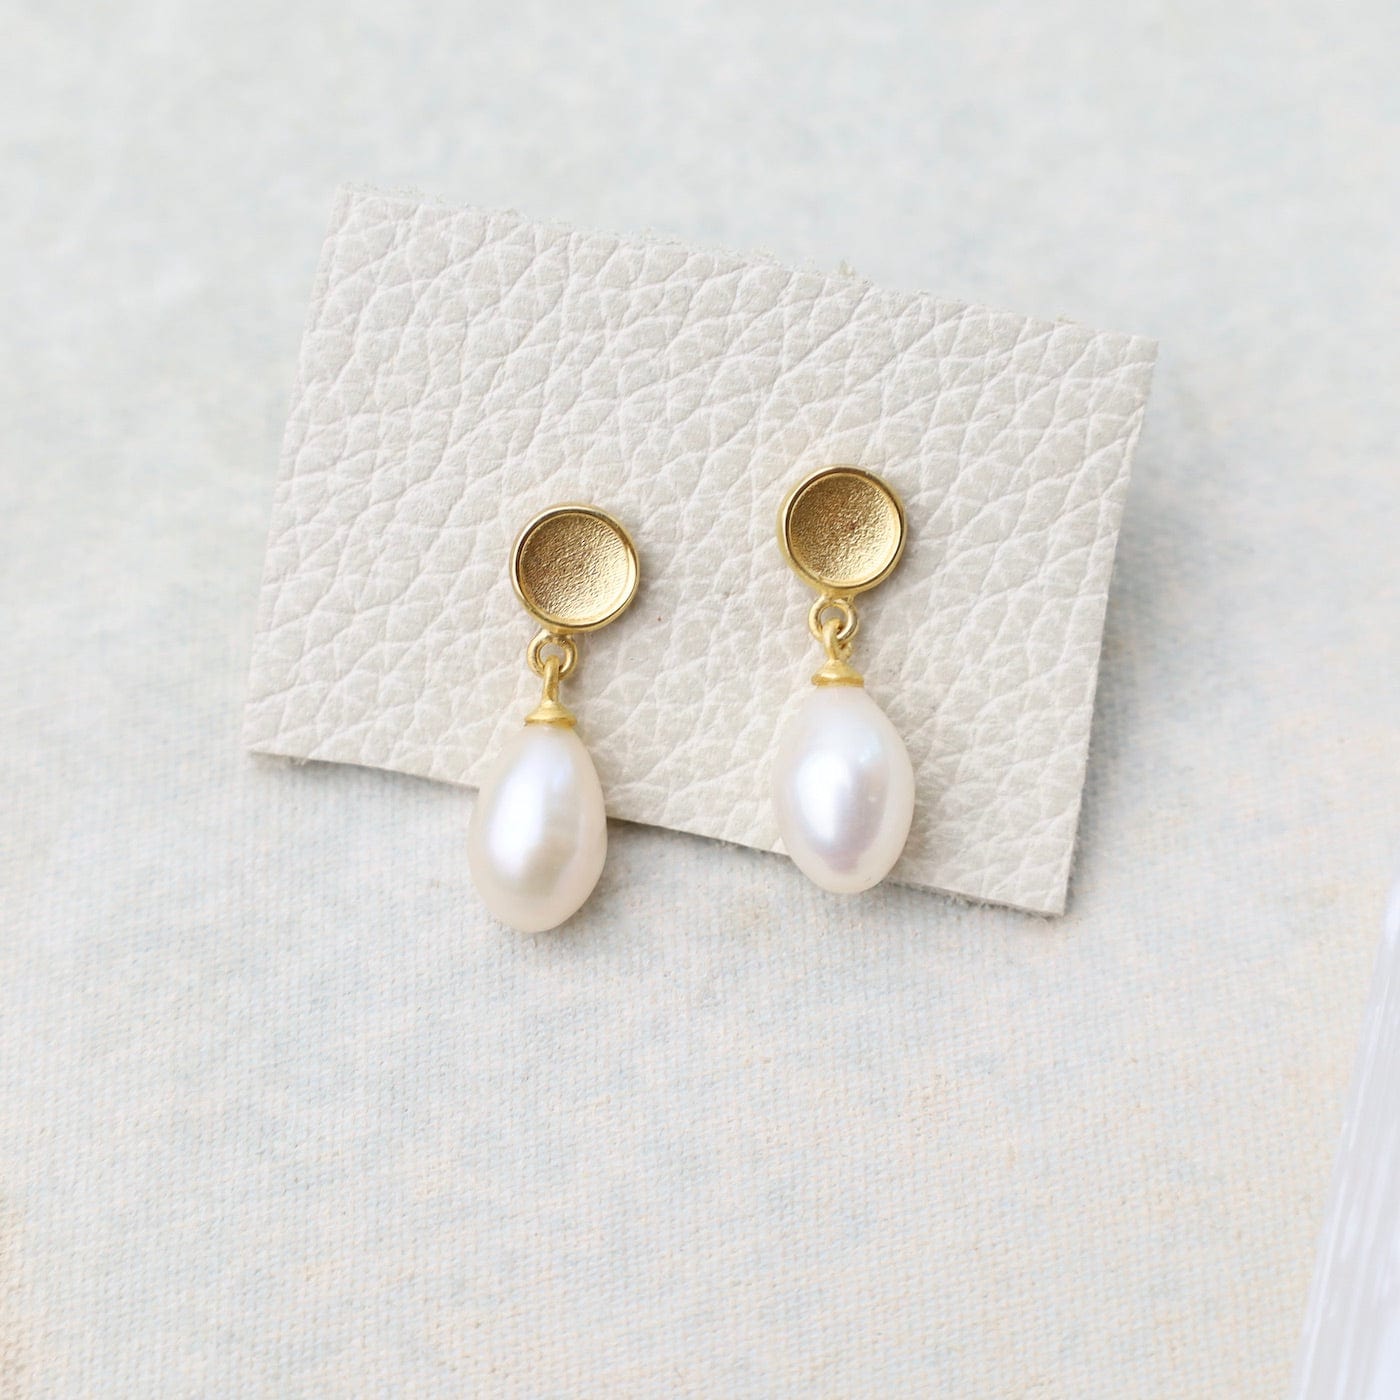 Buy 10mm Pearl Stud Earrings, Gold Pearl Post Earrings, Cream Pearl Earring  Studs, Gold Fill, Sweet 16, Wedding Jewelry, Bridesmaid Gift Online in  India - Etsy